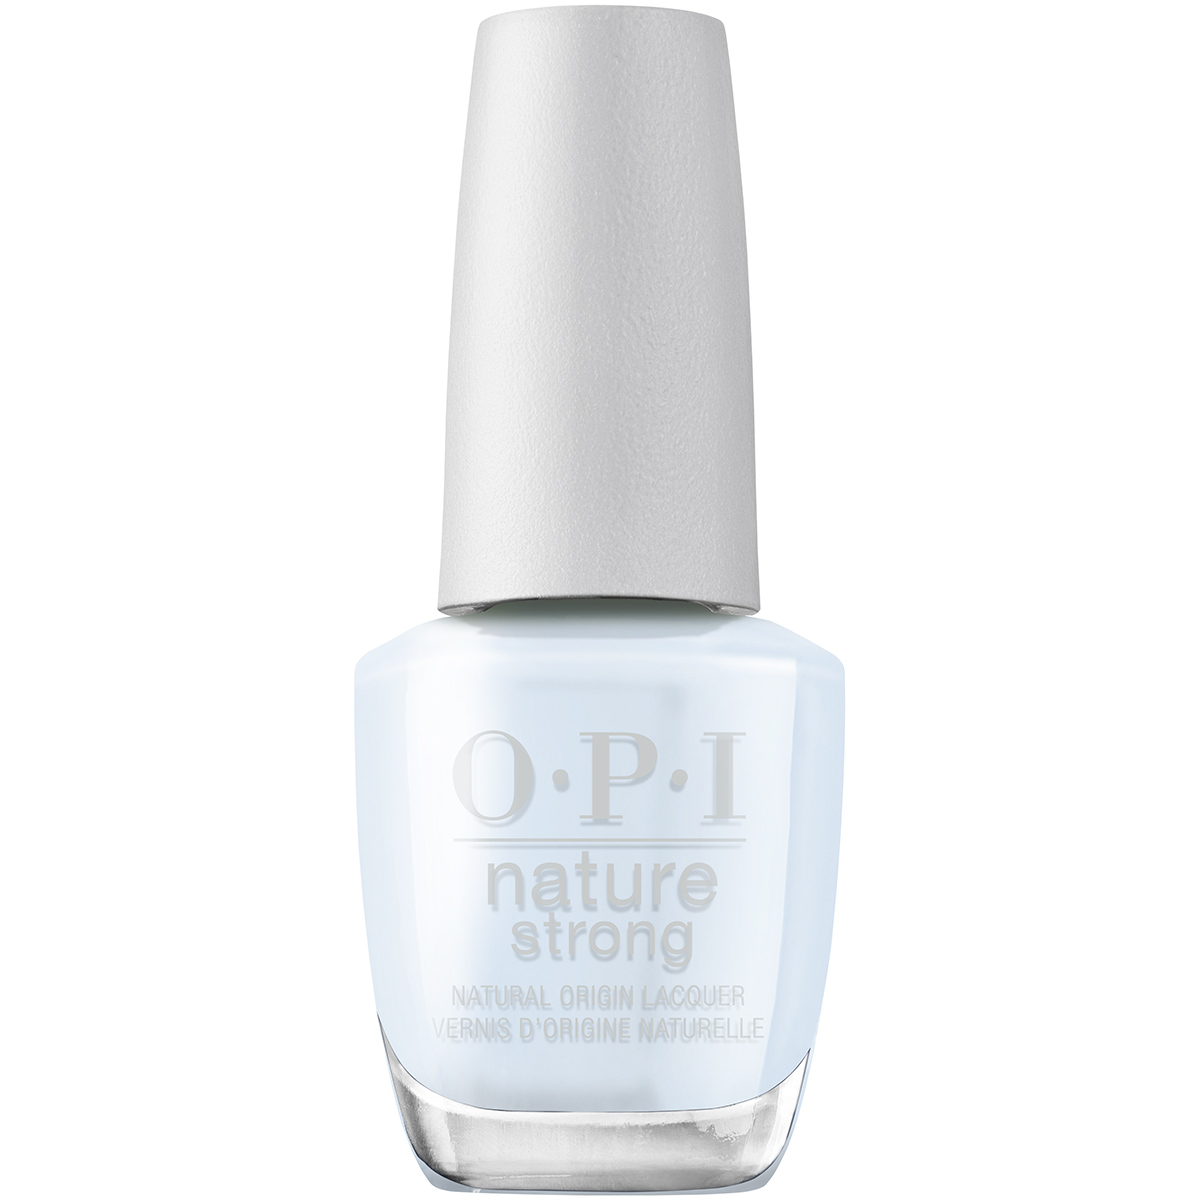 Lac de unghii Nature Strong, Raindrop Expectations 15 ml, Opi